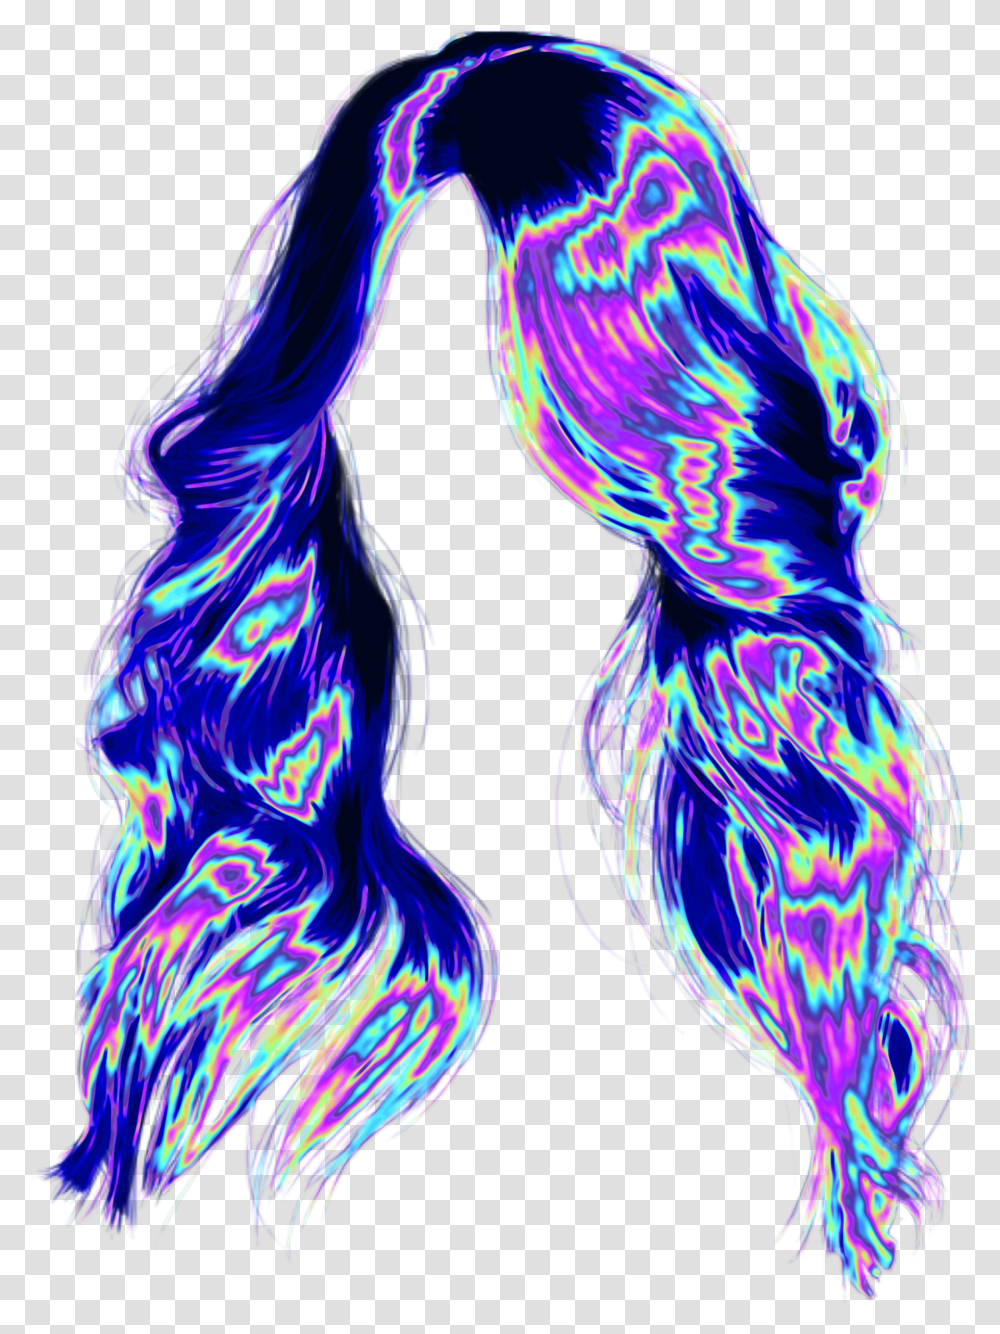 Holo Holographic Vaporwave Aesthetic Tumblr Lace Wig Transparent Png